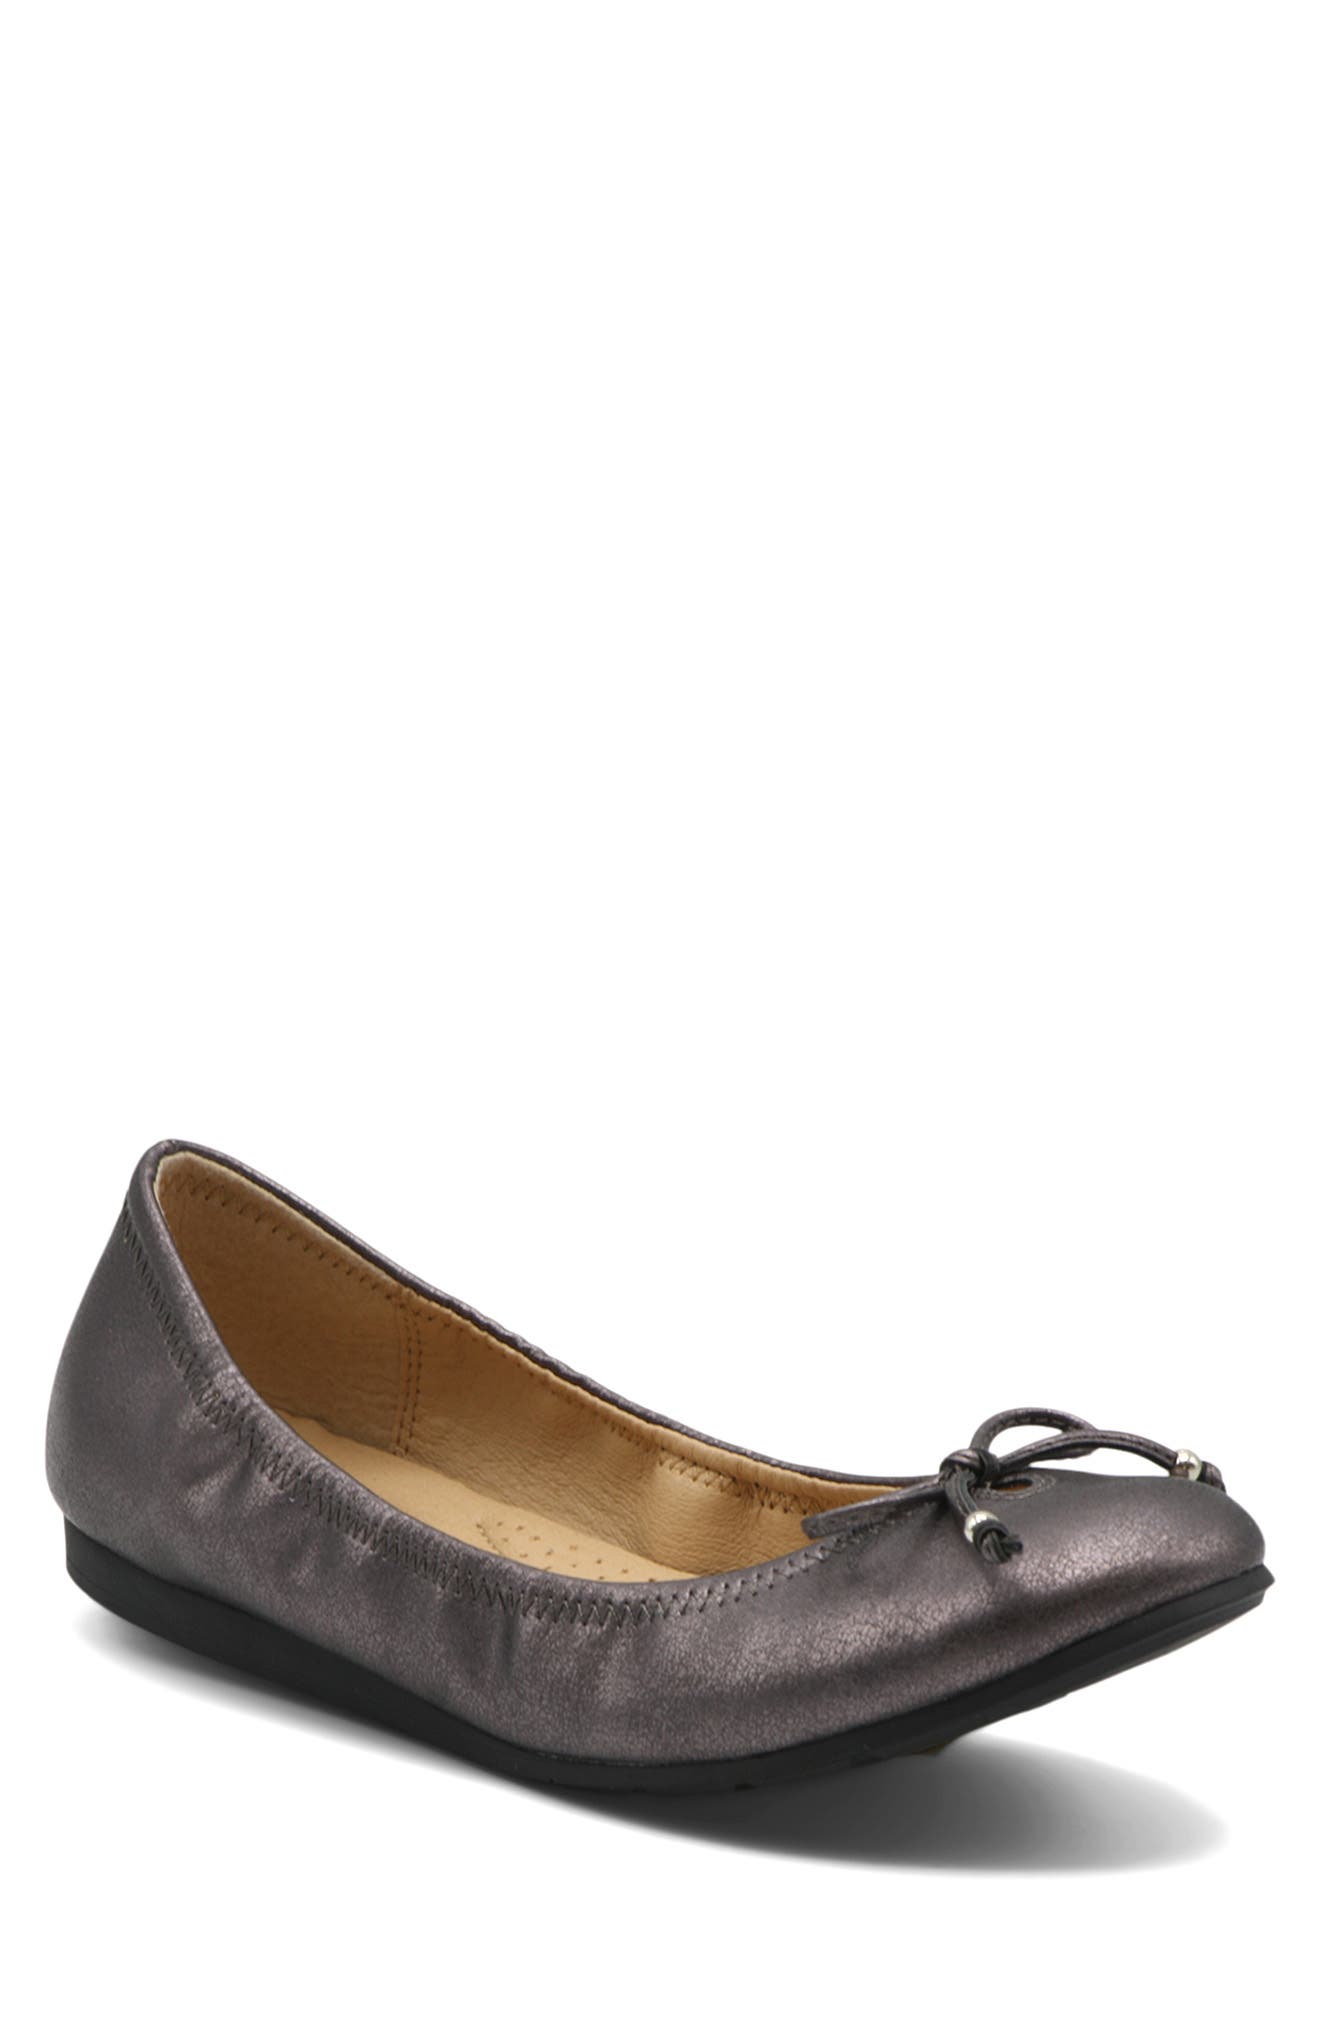 Mootsies Tootsies Women's Cameo Ballet Flats Women's Shoes In Pewter